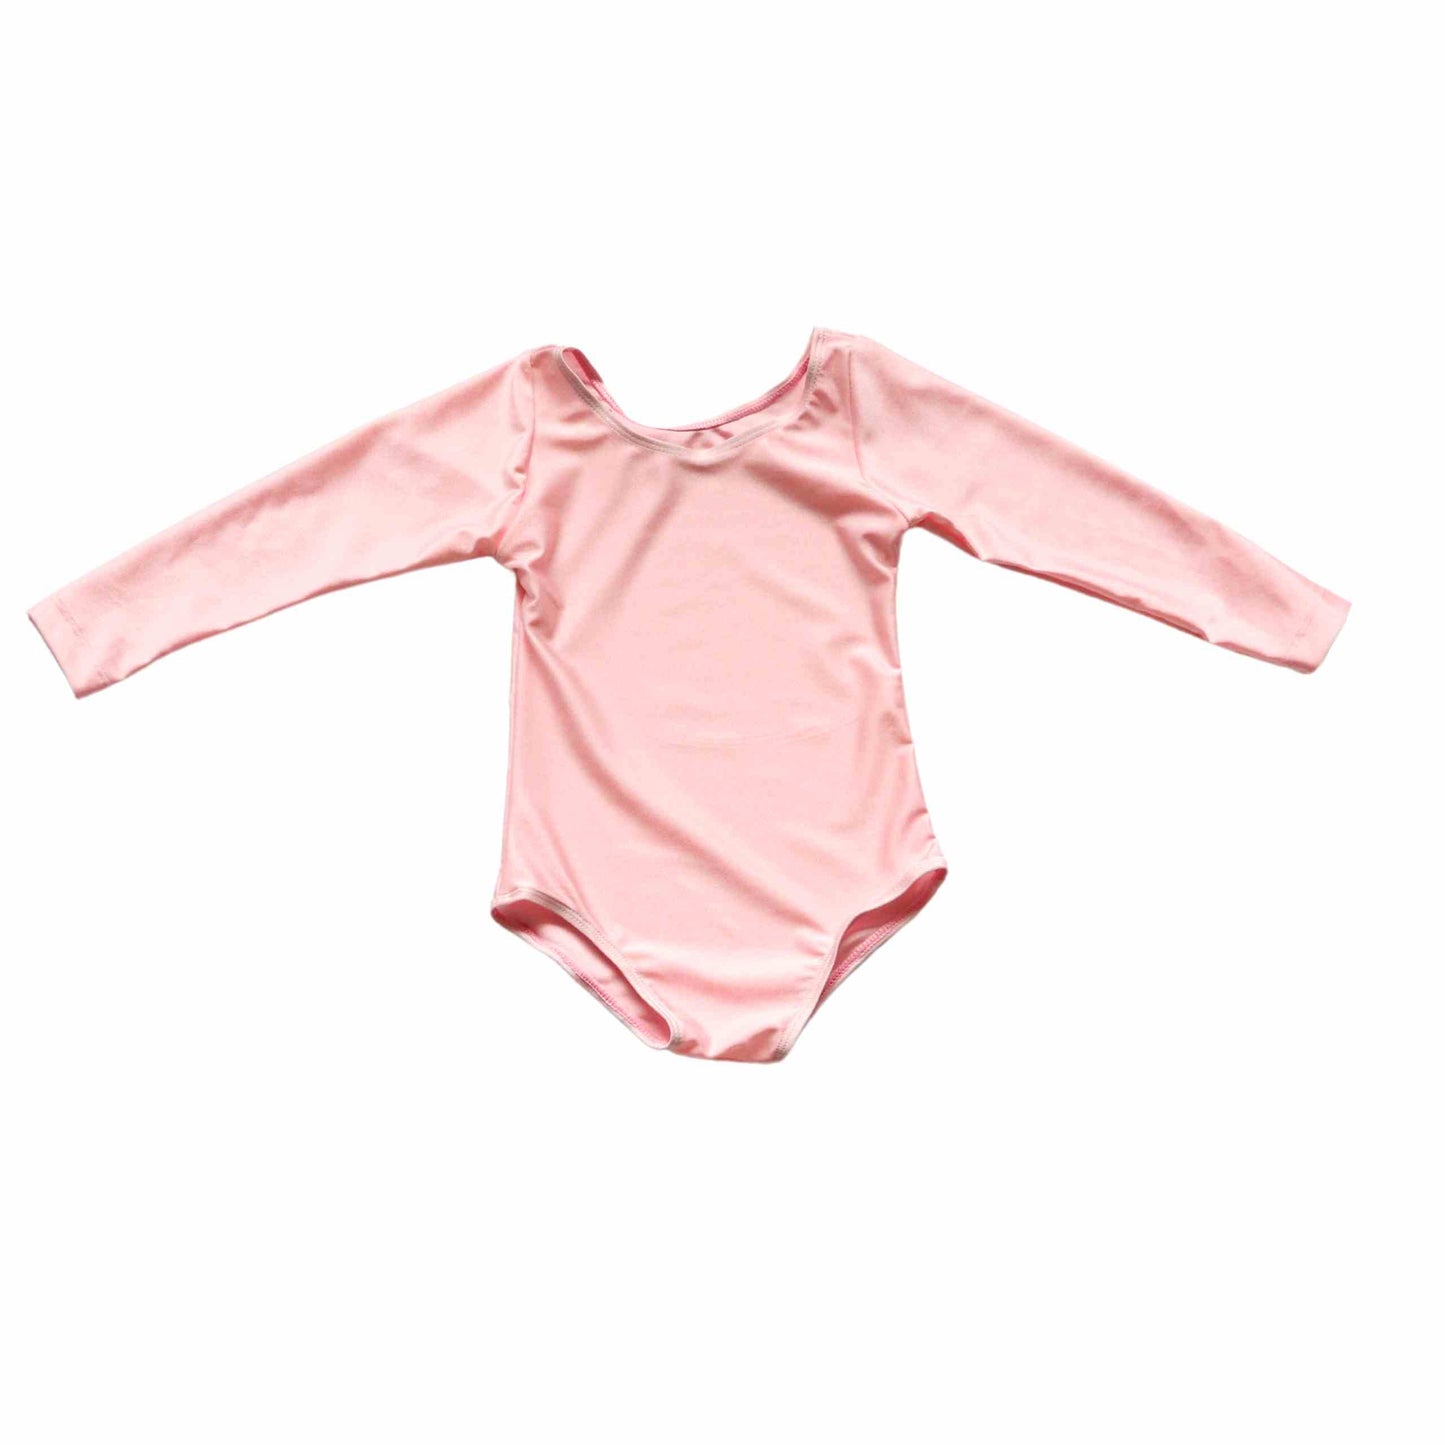 a pink bodysuit on a white background